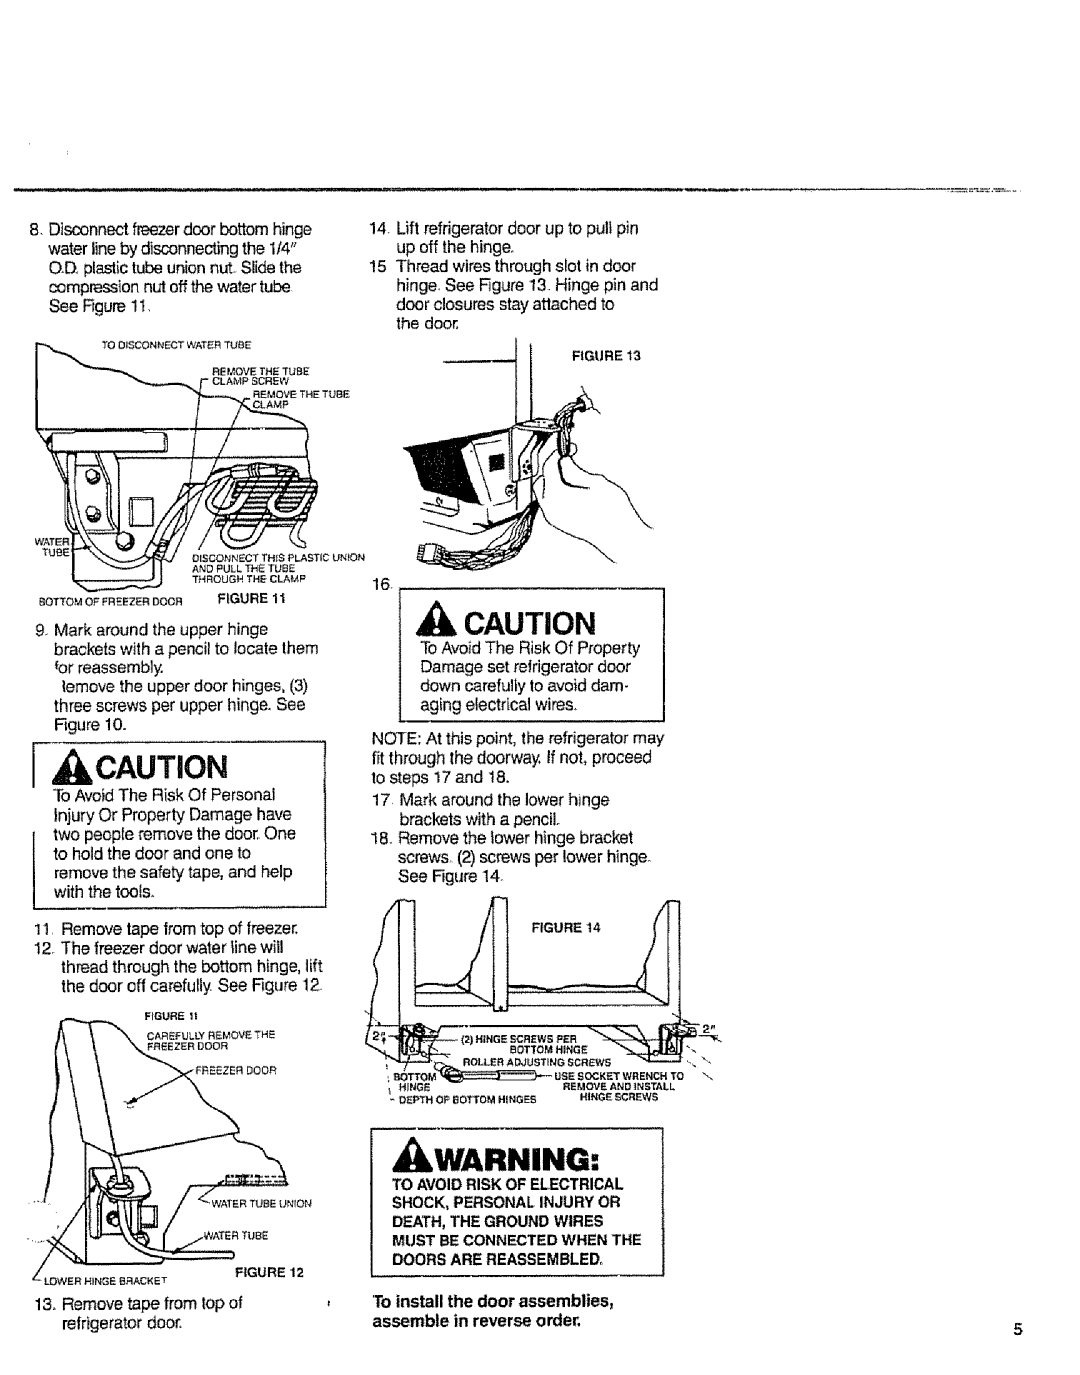 Sears 10062603 manual IkWARNING, CAUTmON, Remove tape from top of, Toinstall the door assemblies 